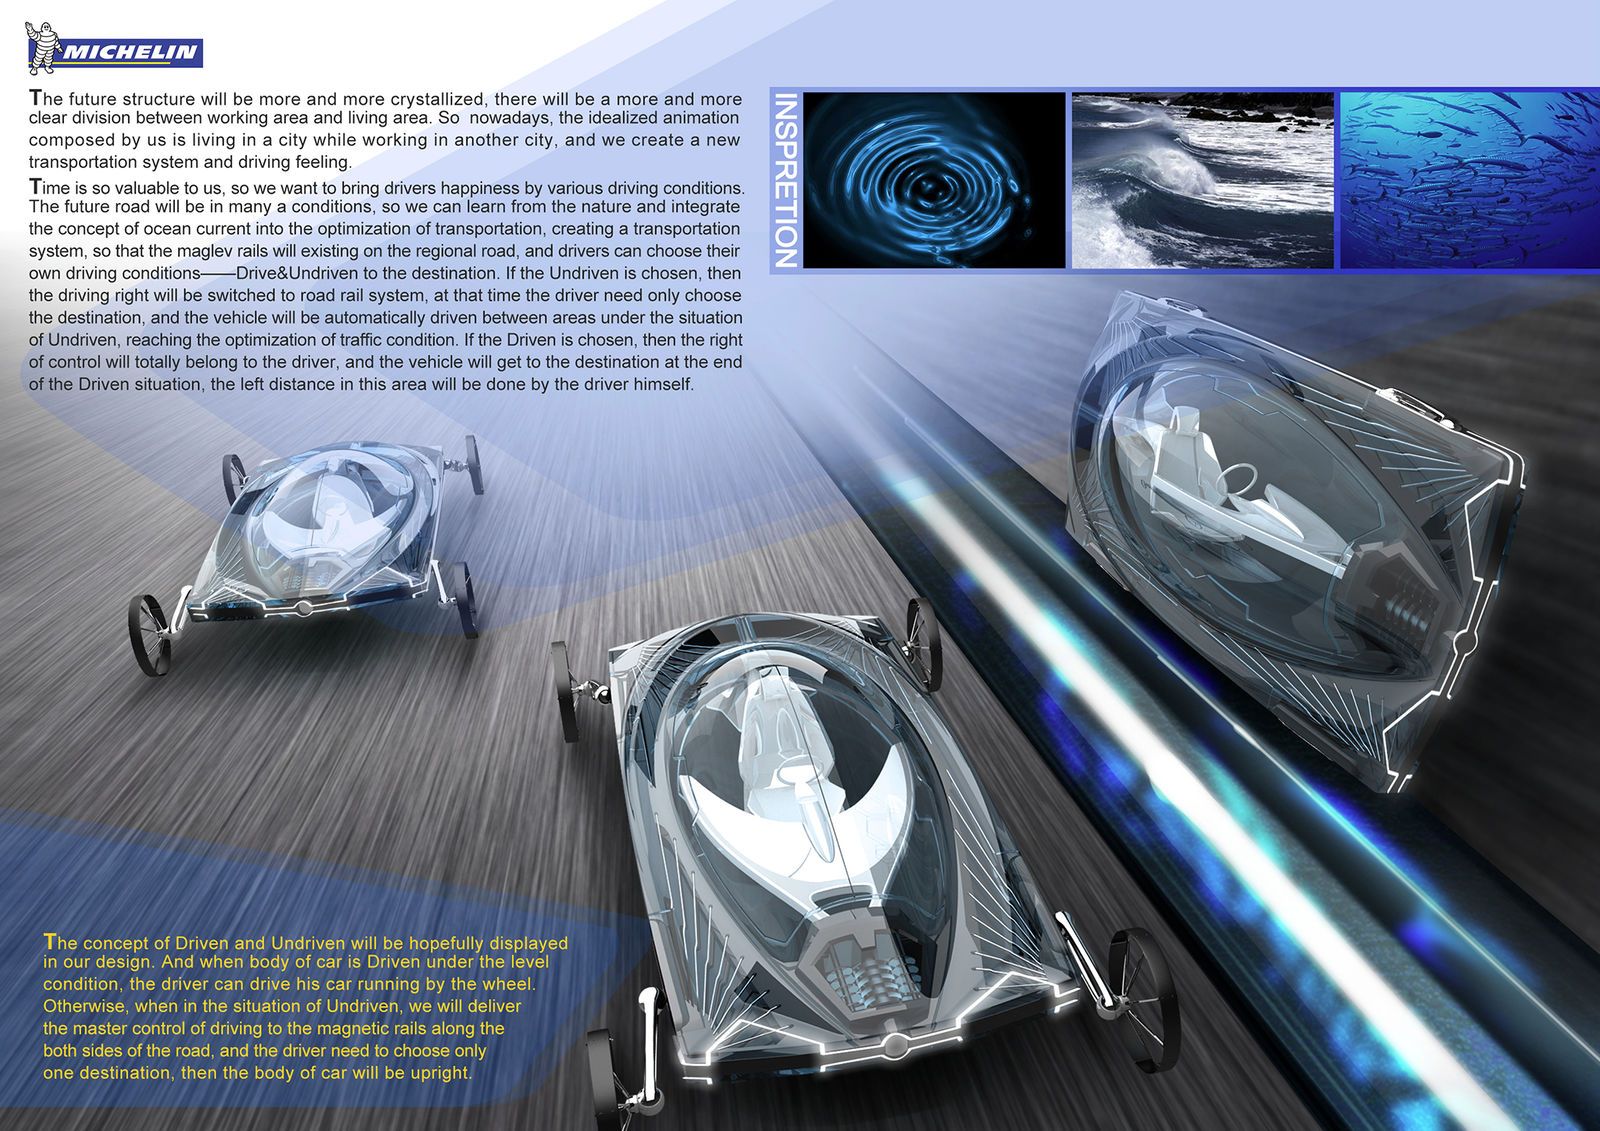 Amazing futuristic car designs from racing cars to rescue vehicles image 3